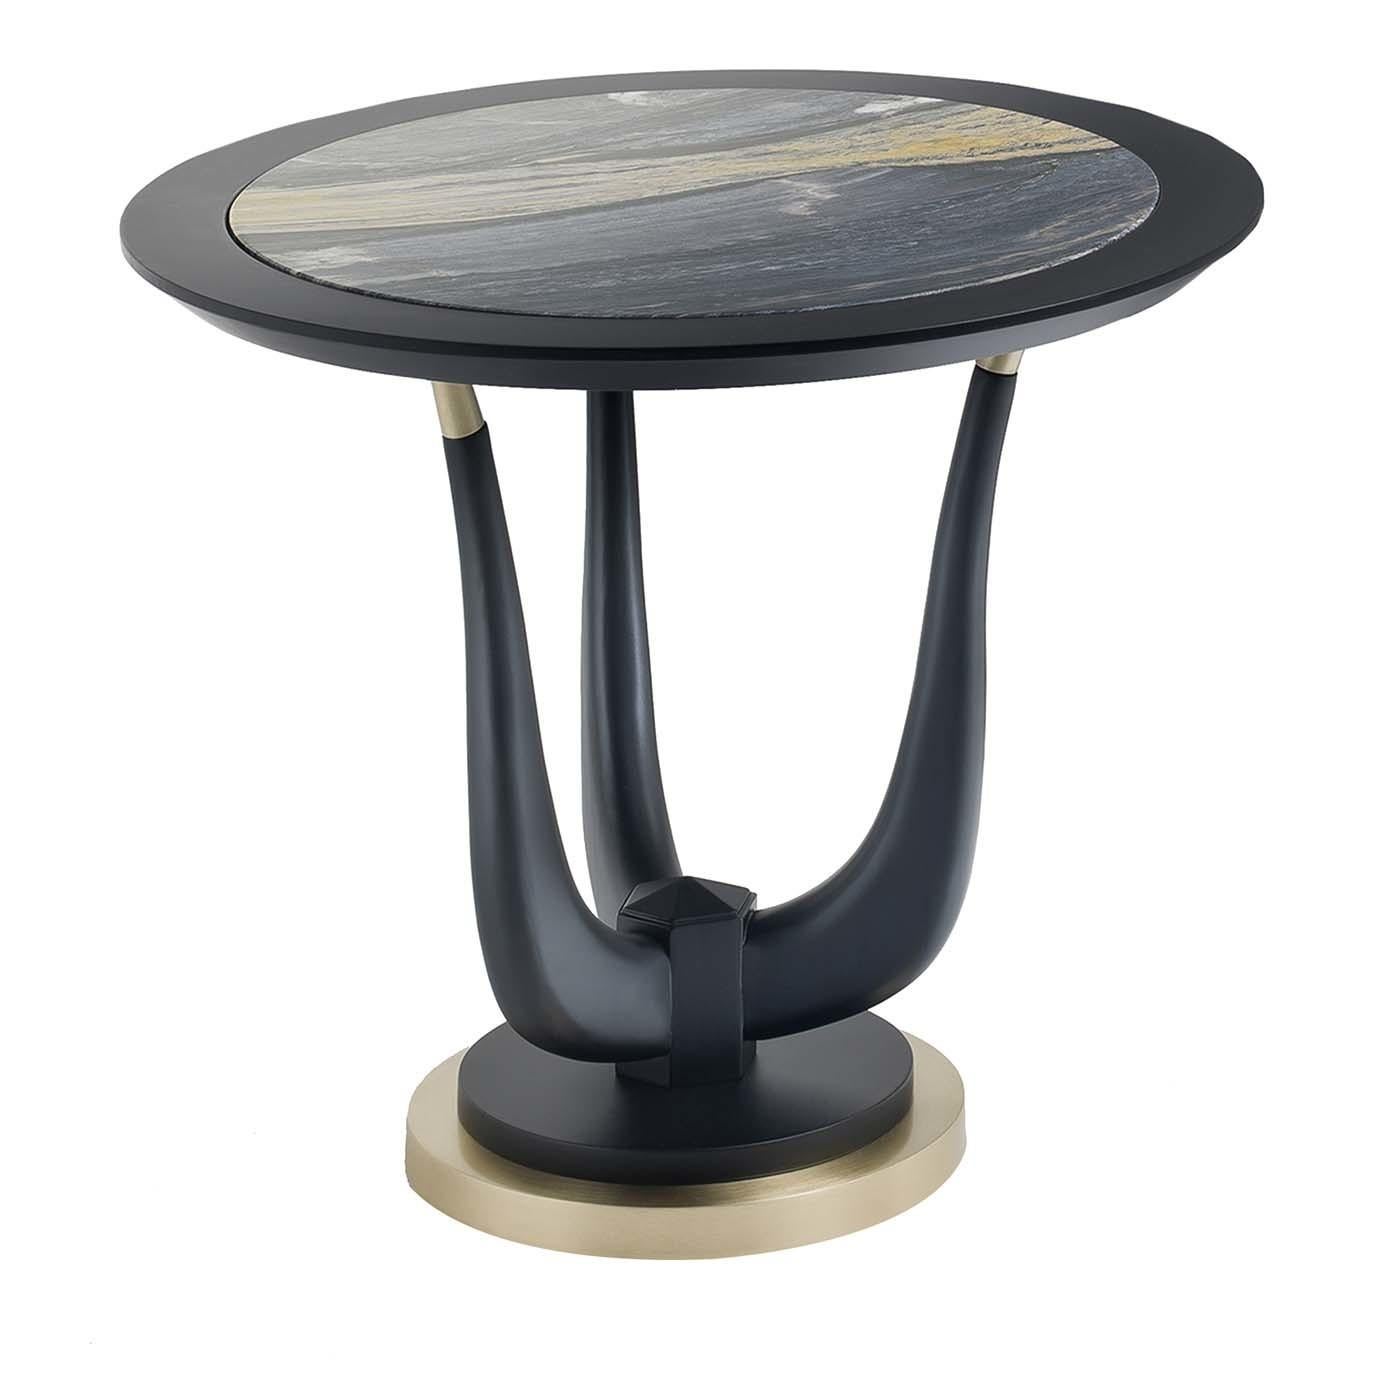 This stunning side table combines high-quality materials, exquisite finishes, and a design that is both classic and modern. Creating a mesmerizing combination of round volumes and sinuous lines, this piece boasts a satin-finished brass round base on